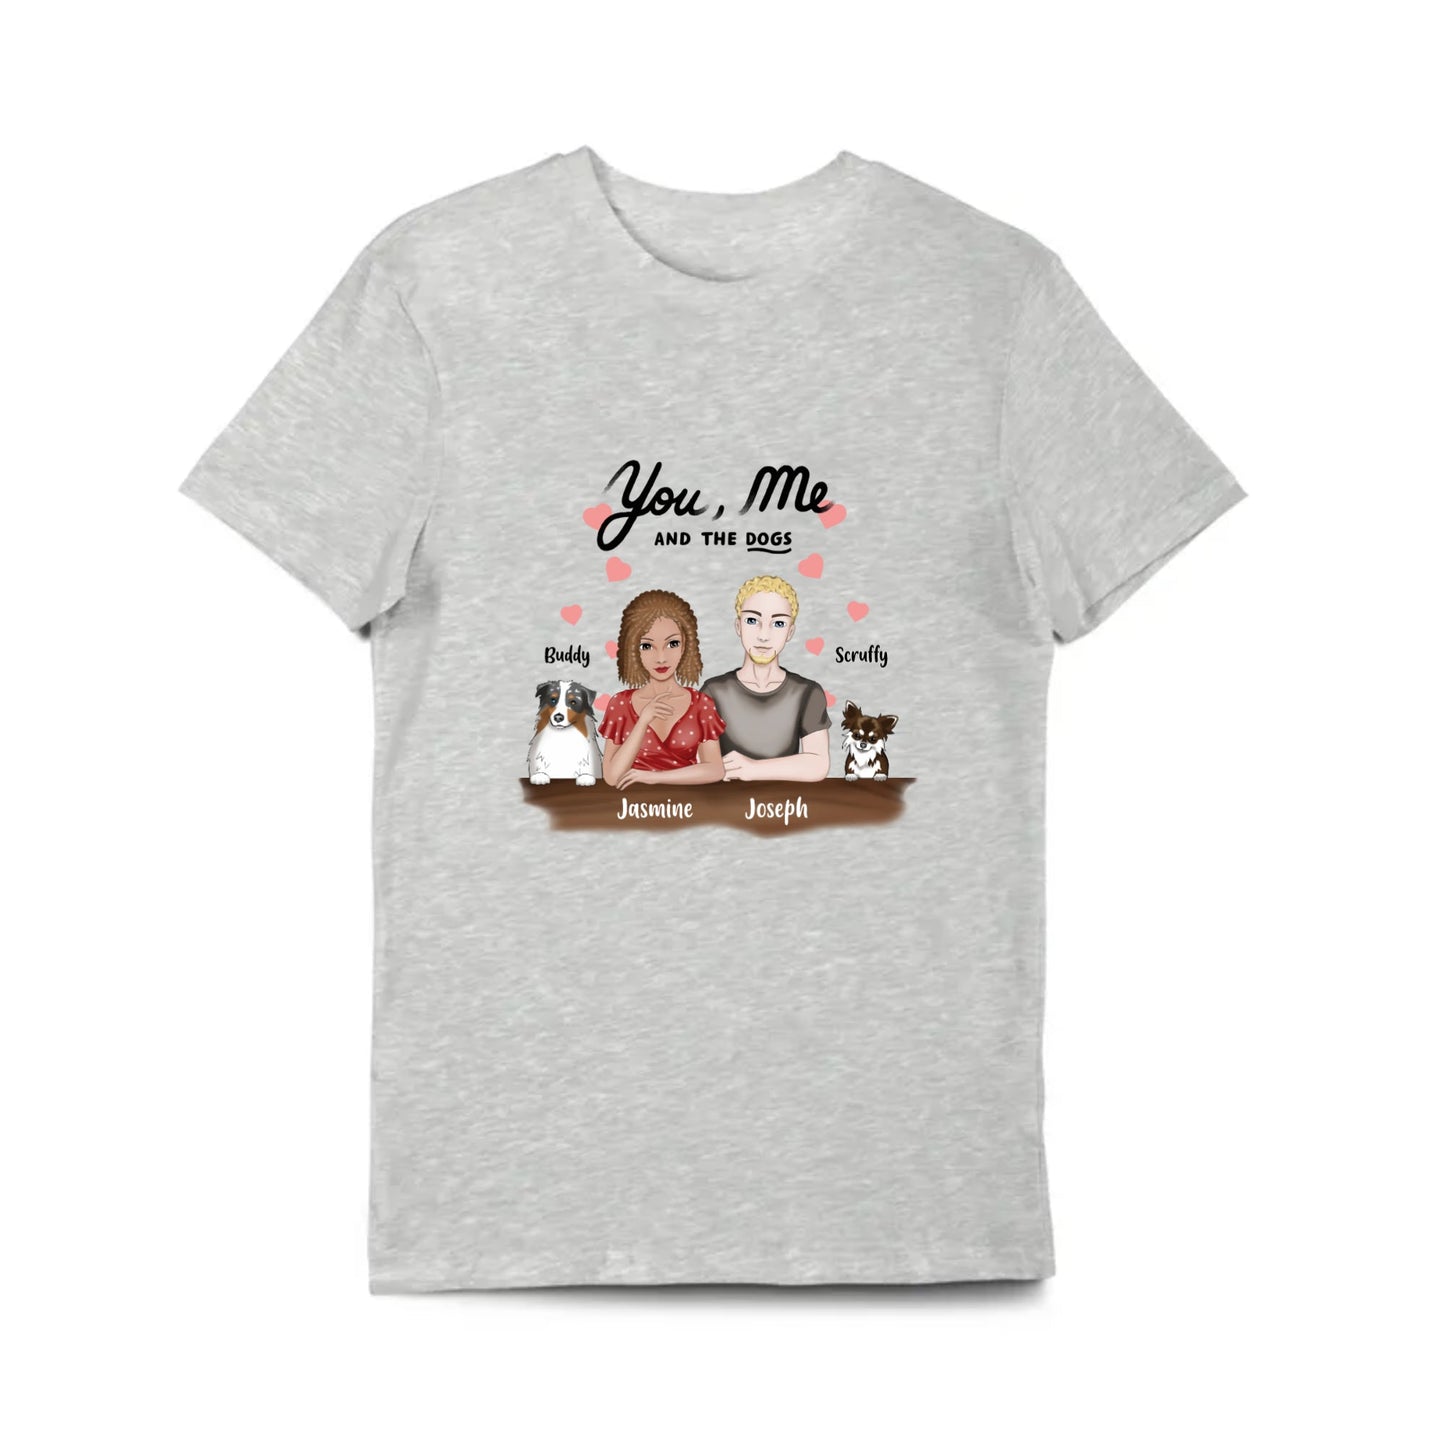 You Me and the Dogs Custom T-shirt - G500 5.3 oz. T-Shirt